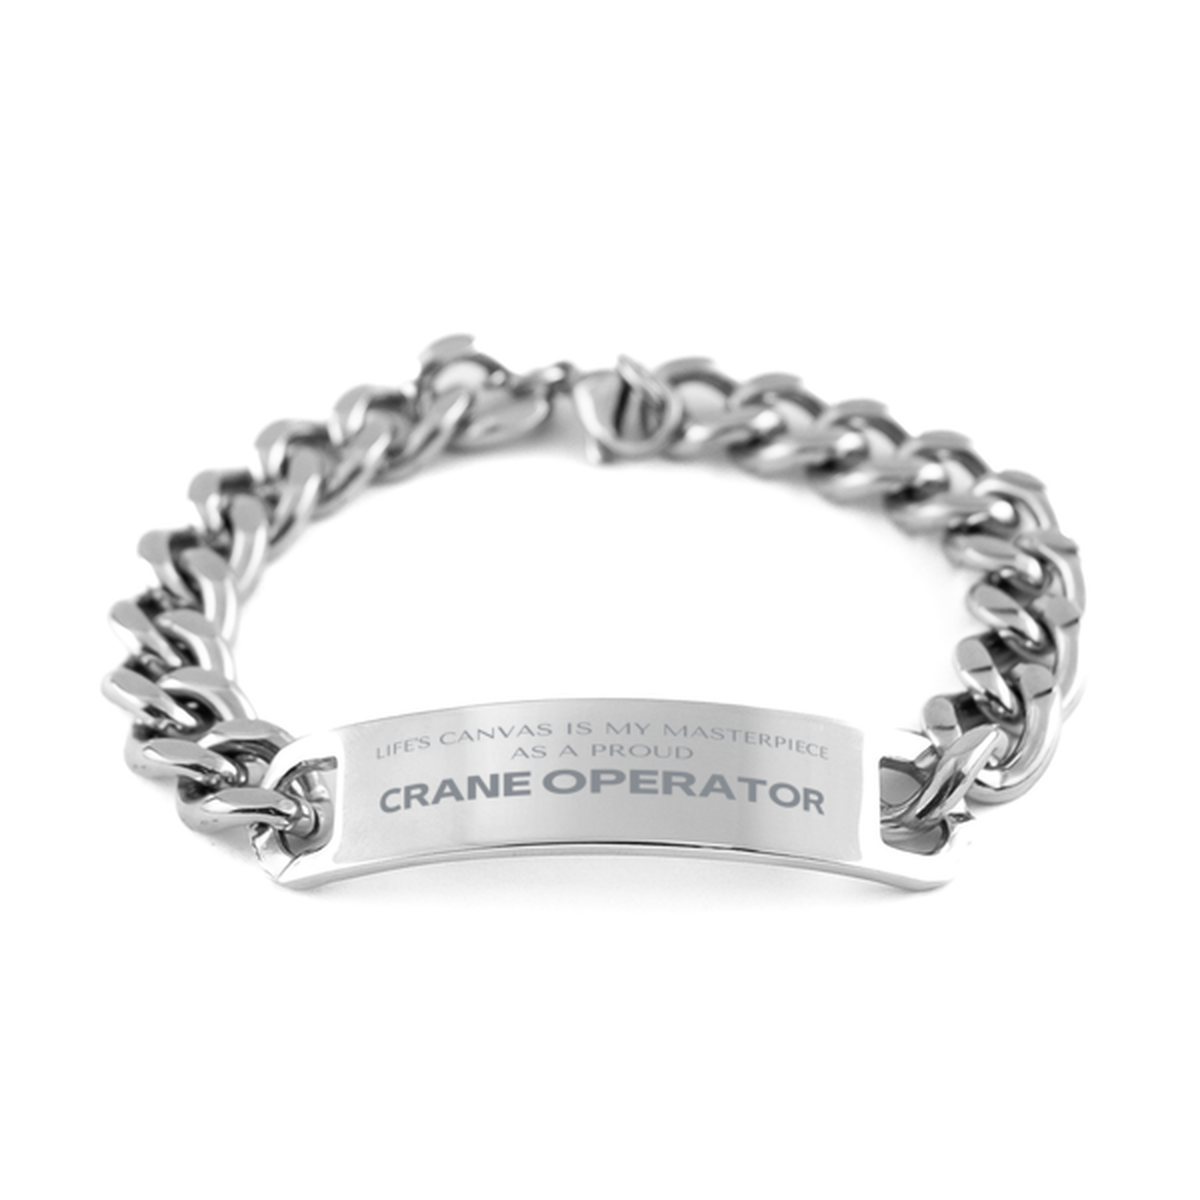 Proud Crane Operator Gifts, Life's canvas is my masterpiece, Epic Birthday Christmas Unique Cuban Chain Stainless Steel Bracelet For Crane Operator, Coworkers, Men, Women, Friends